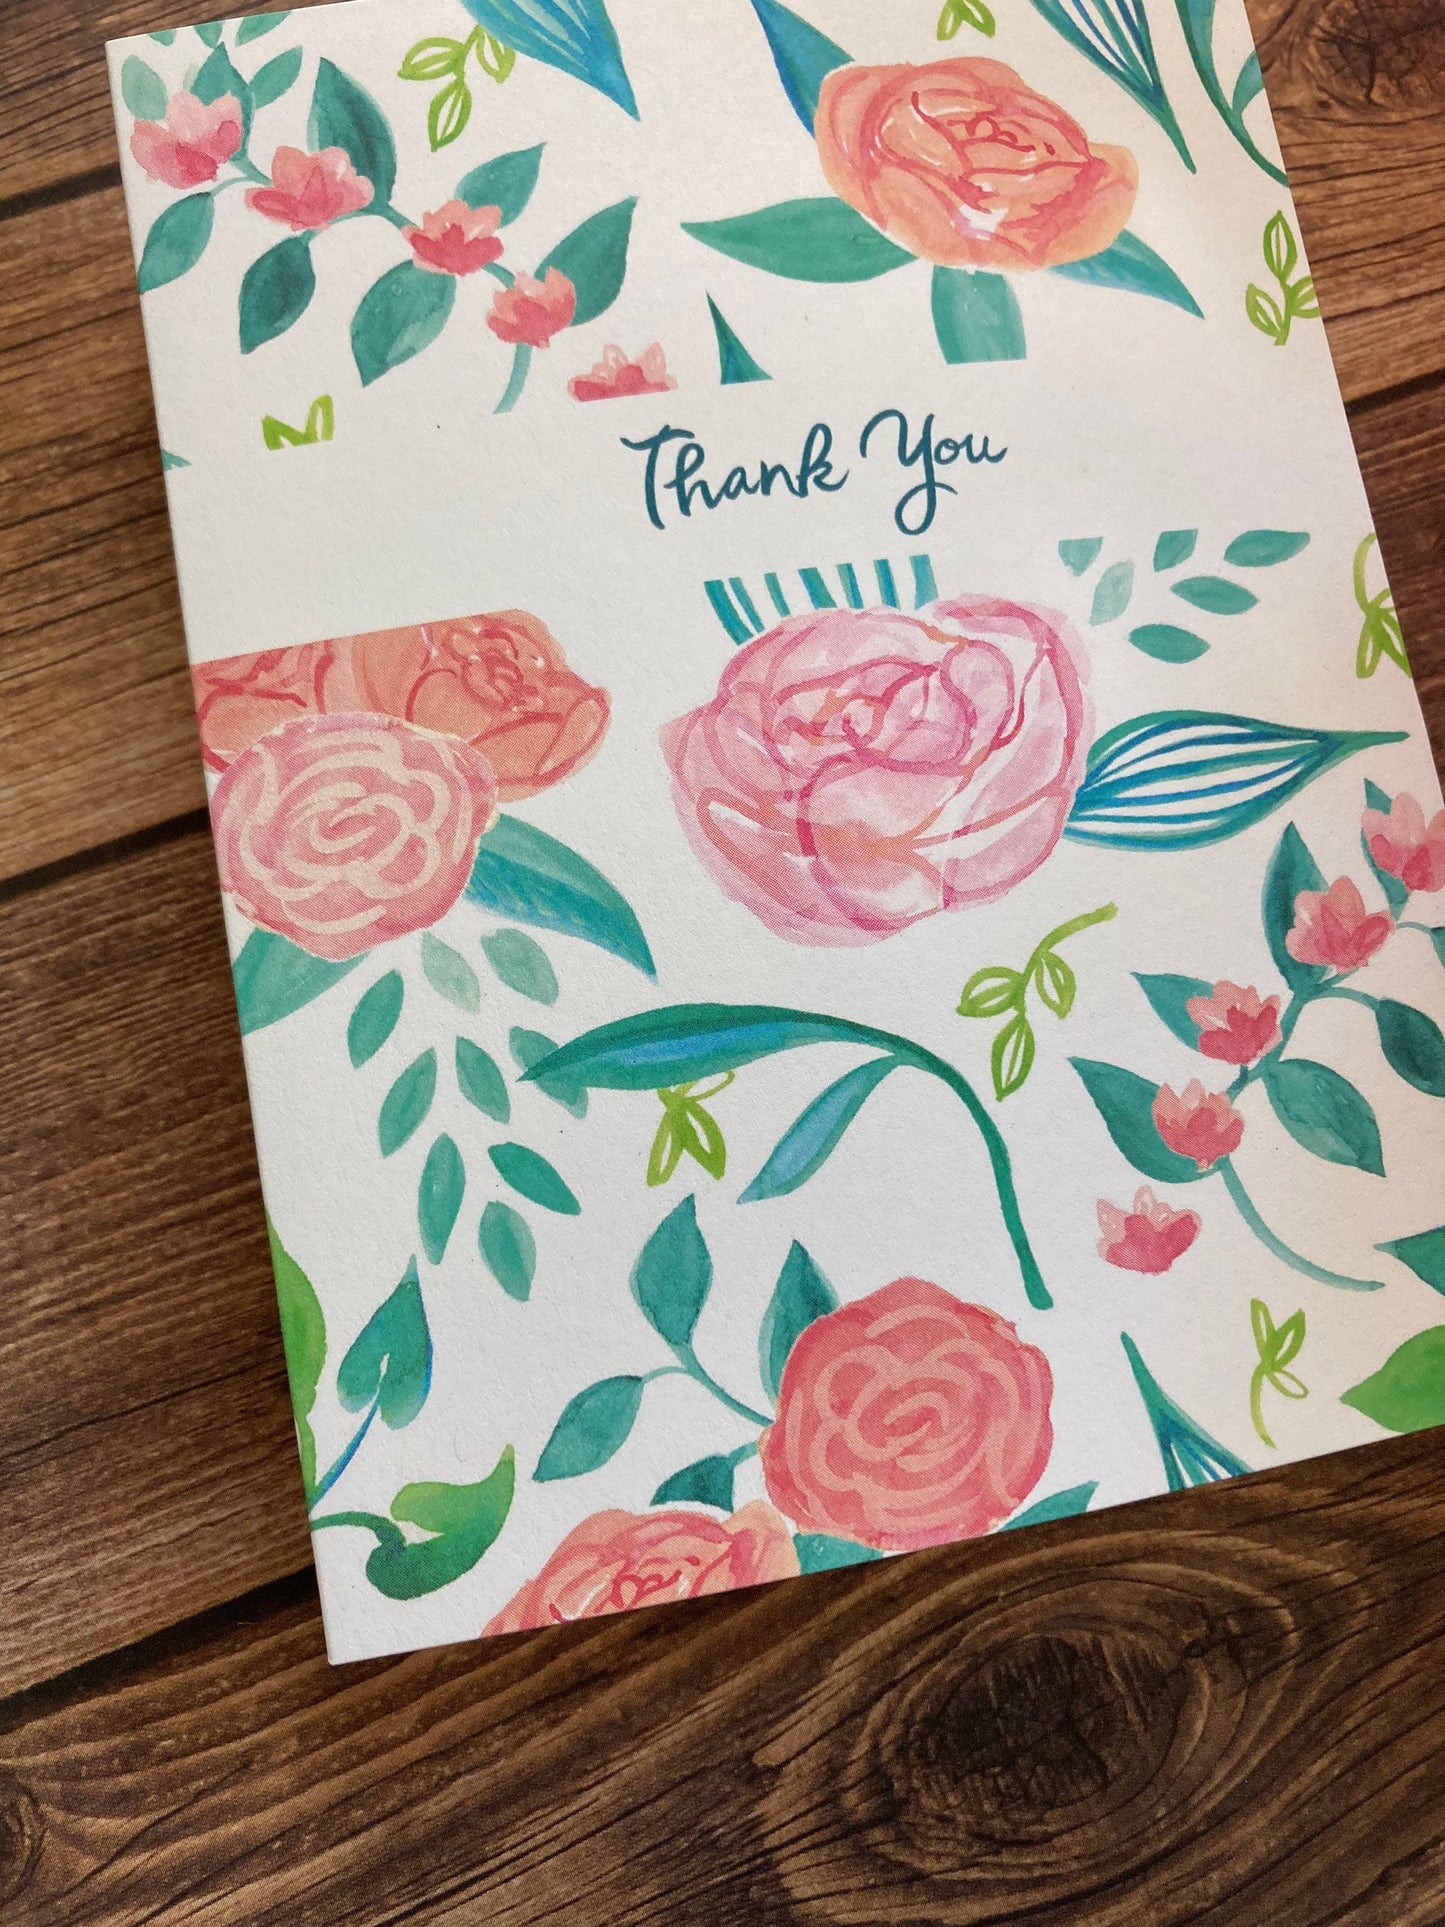 THANKS - Pink and Aqua Florals - bouquet, flowers, anytime appreciation, Eco-Friendly Notecards by Adriana Bergstrom (Adriprints)